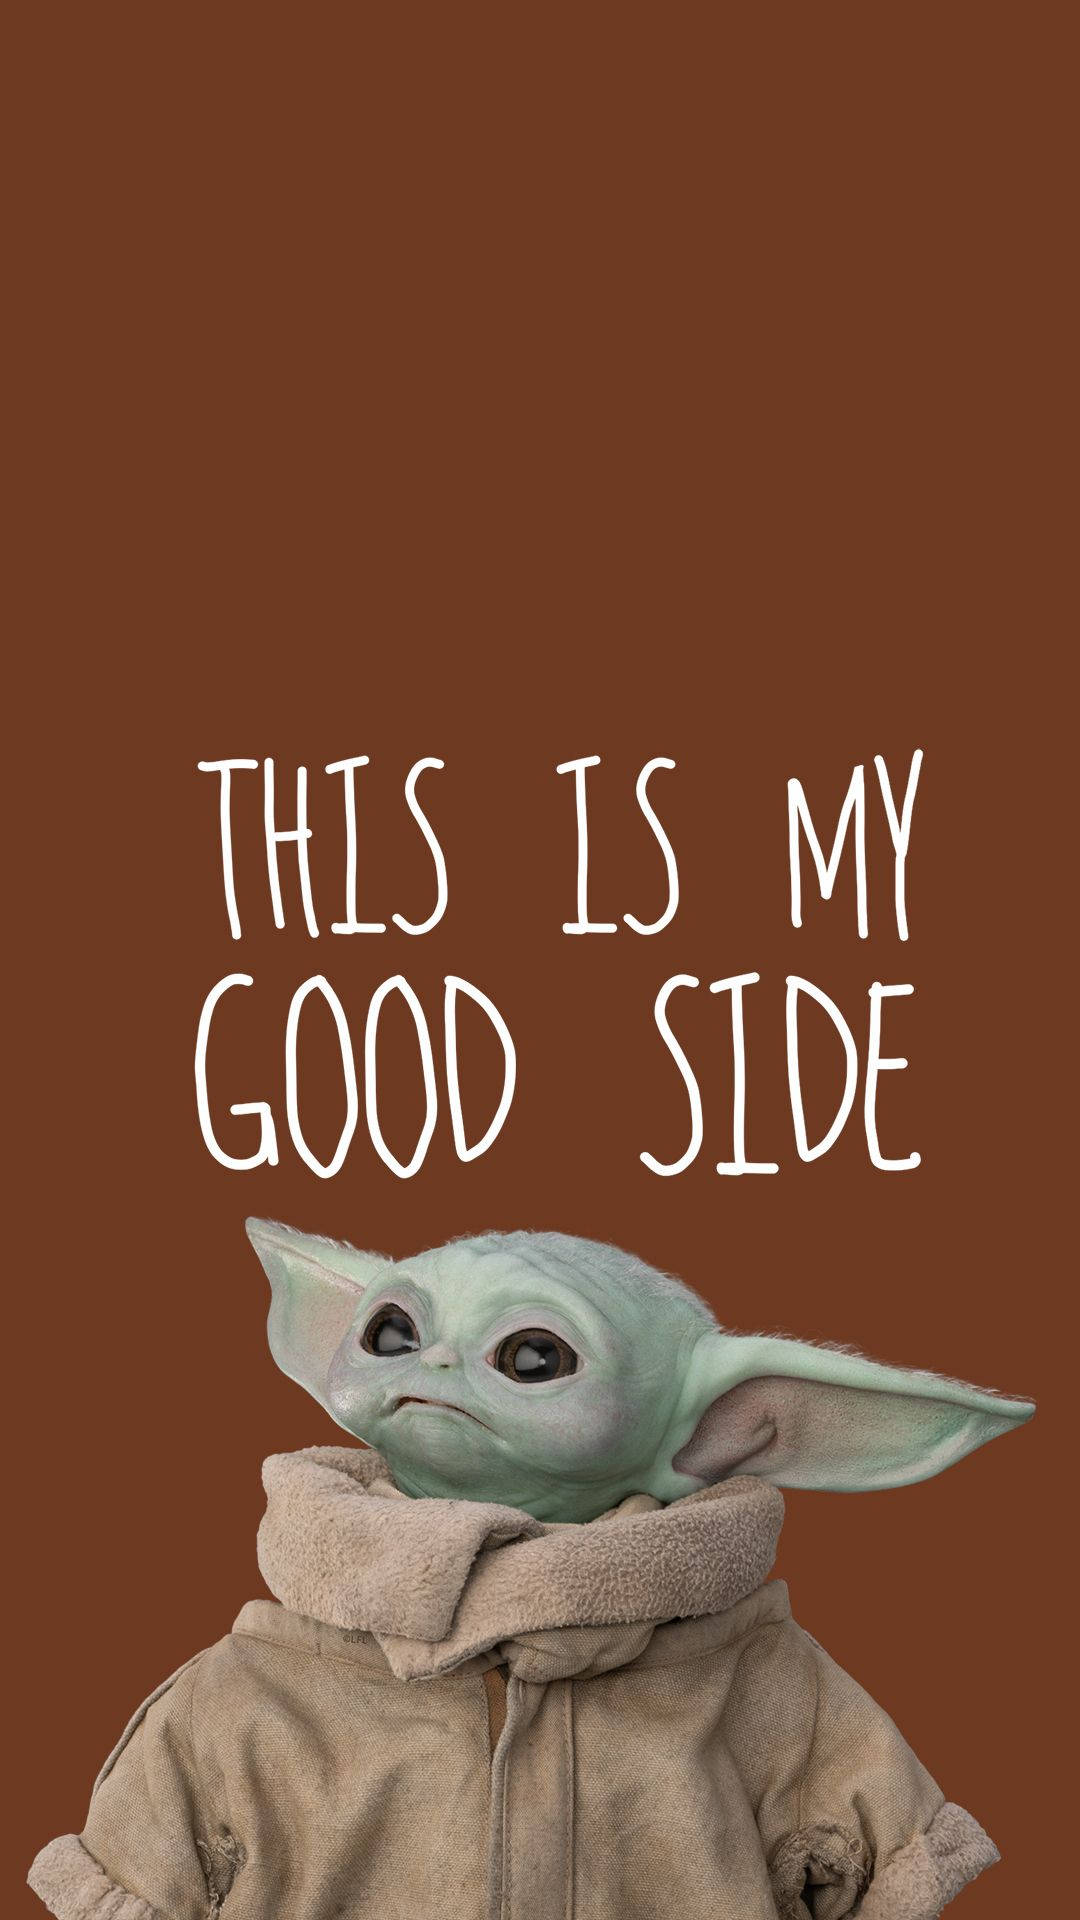 Quote And Baby Yoda